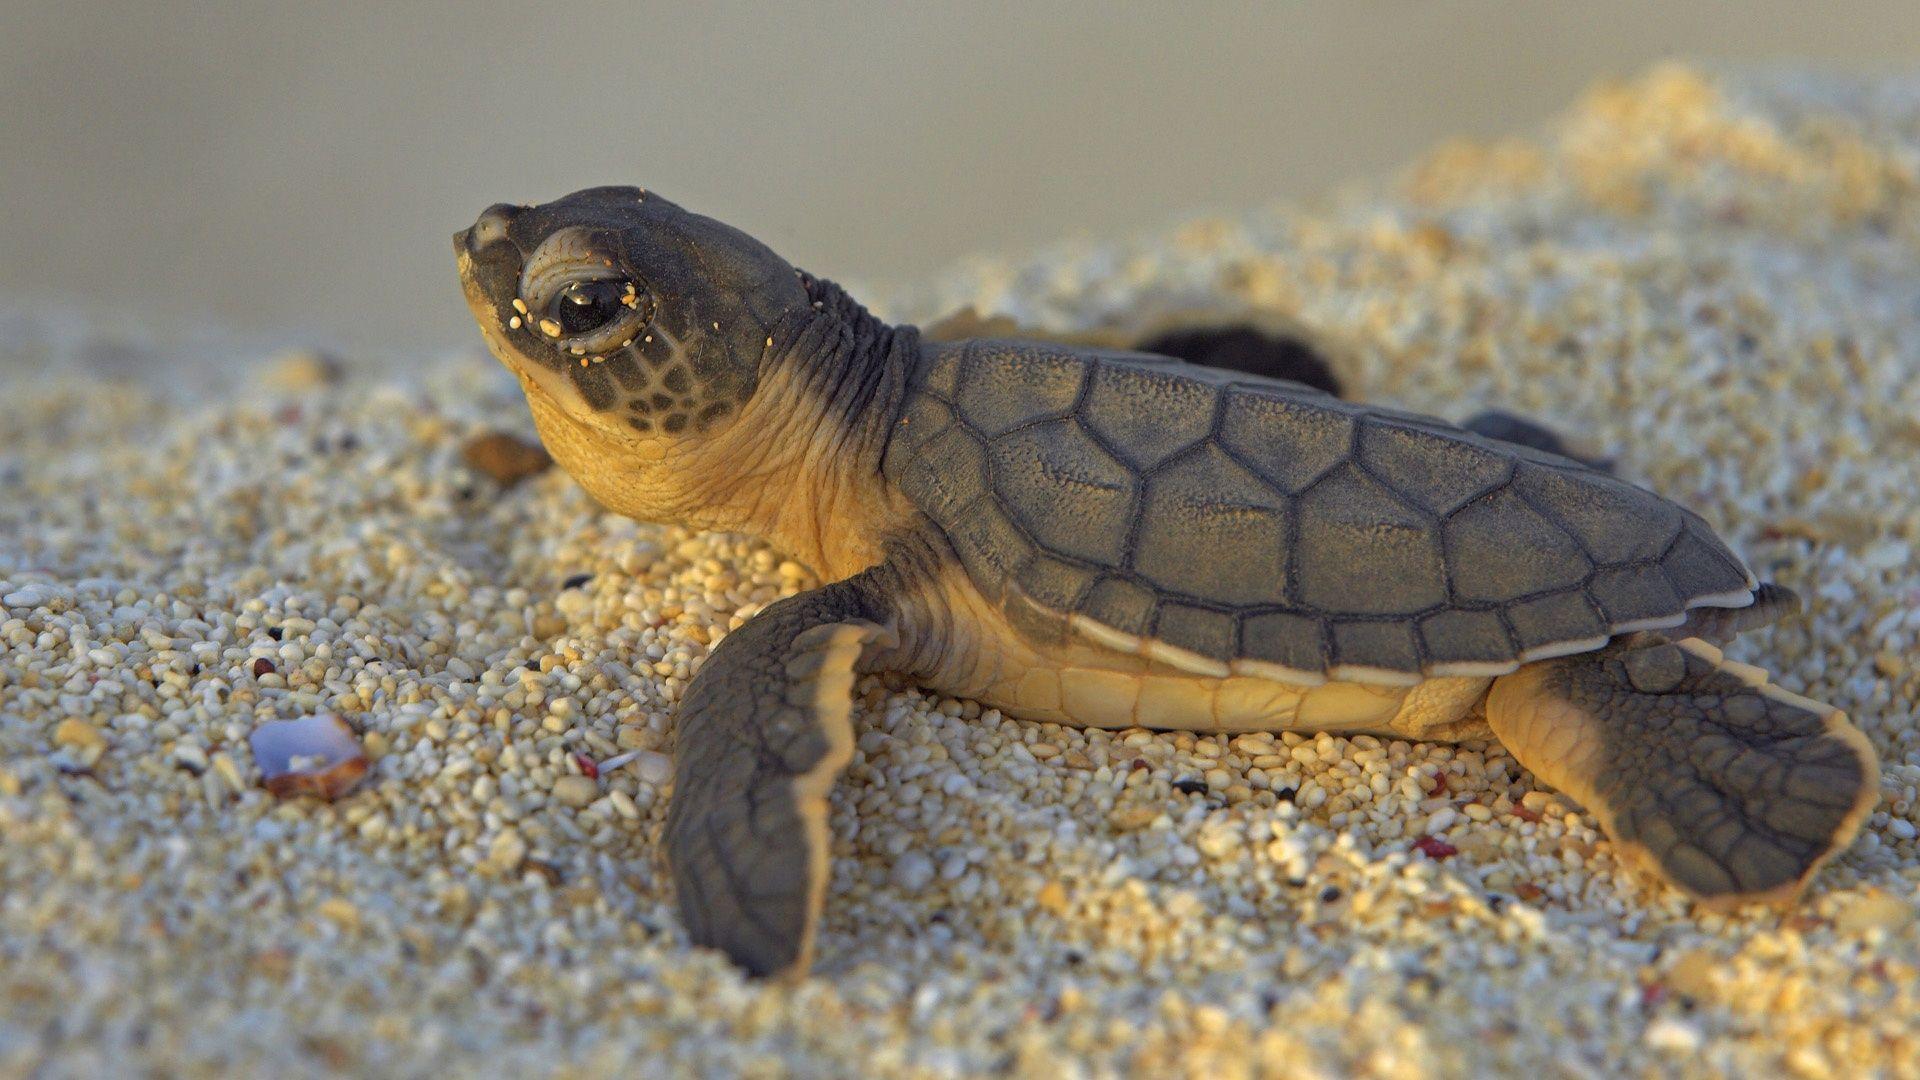 Baby Turtle Wallpaper 46713 1920x1080 px